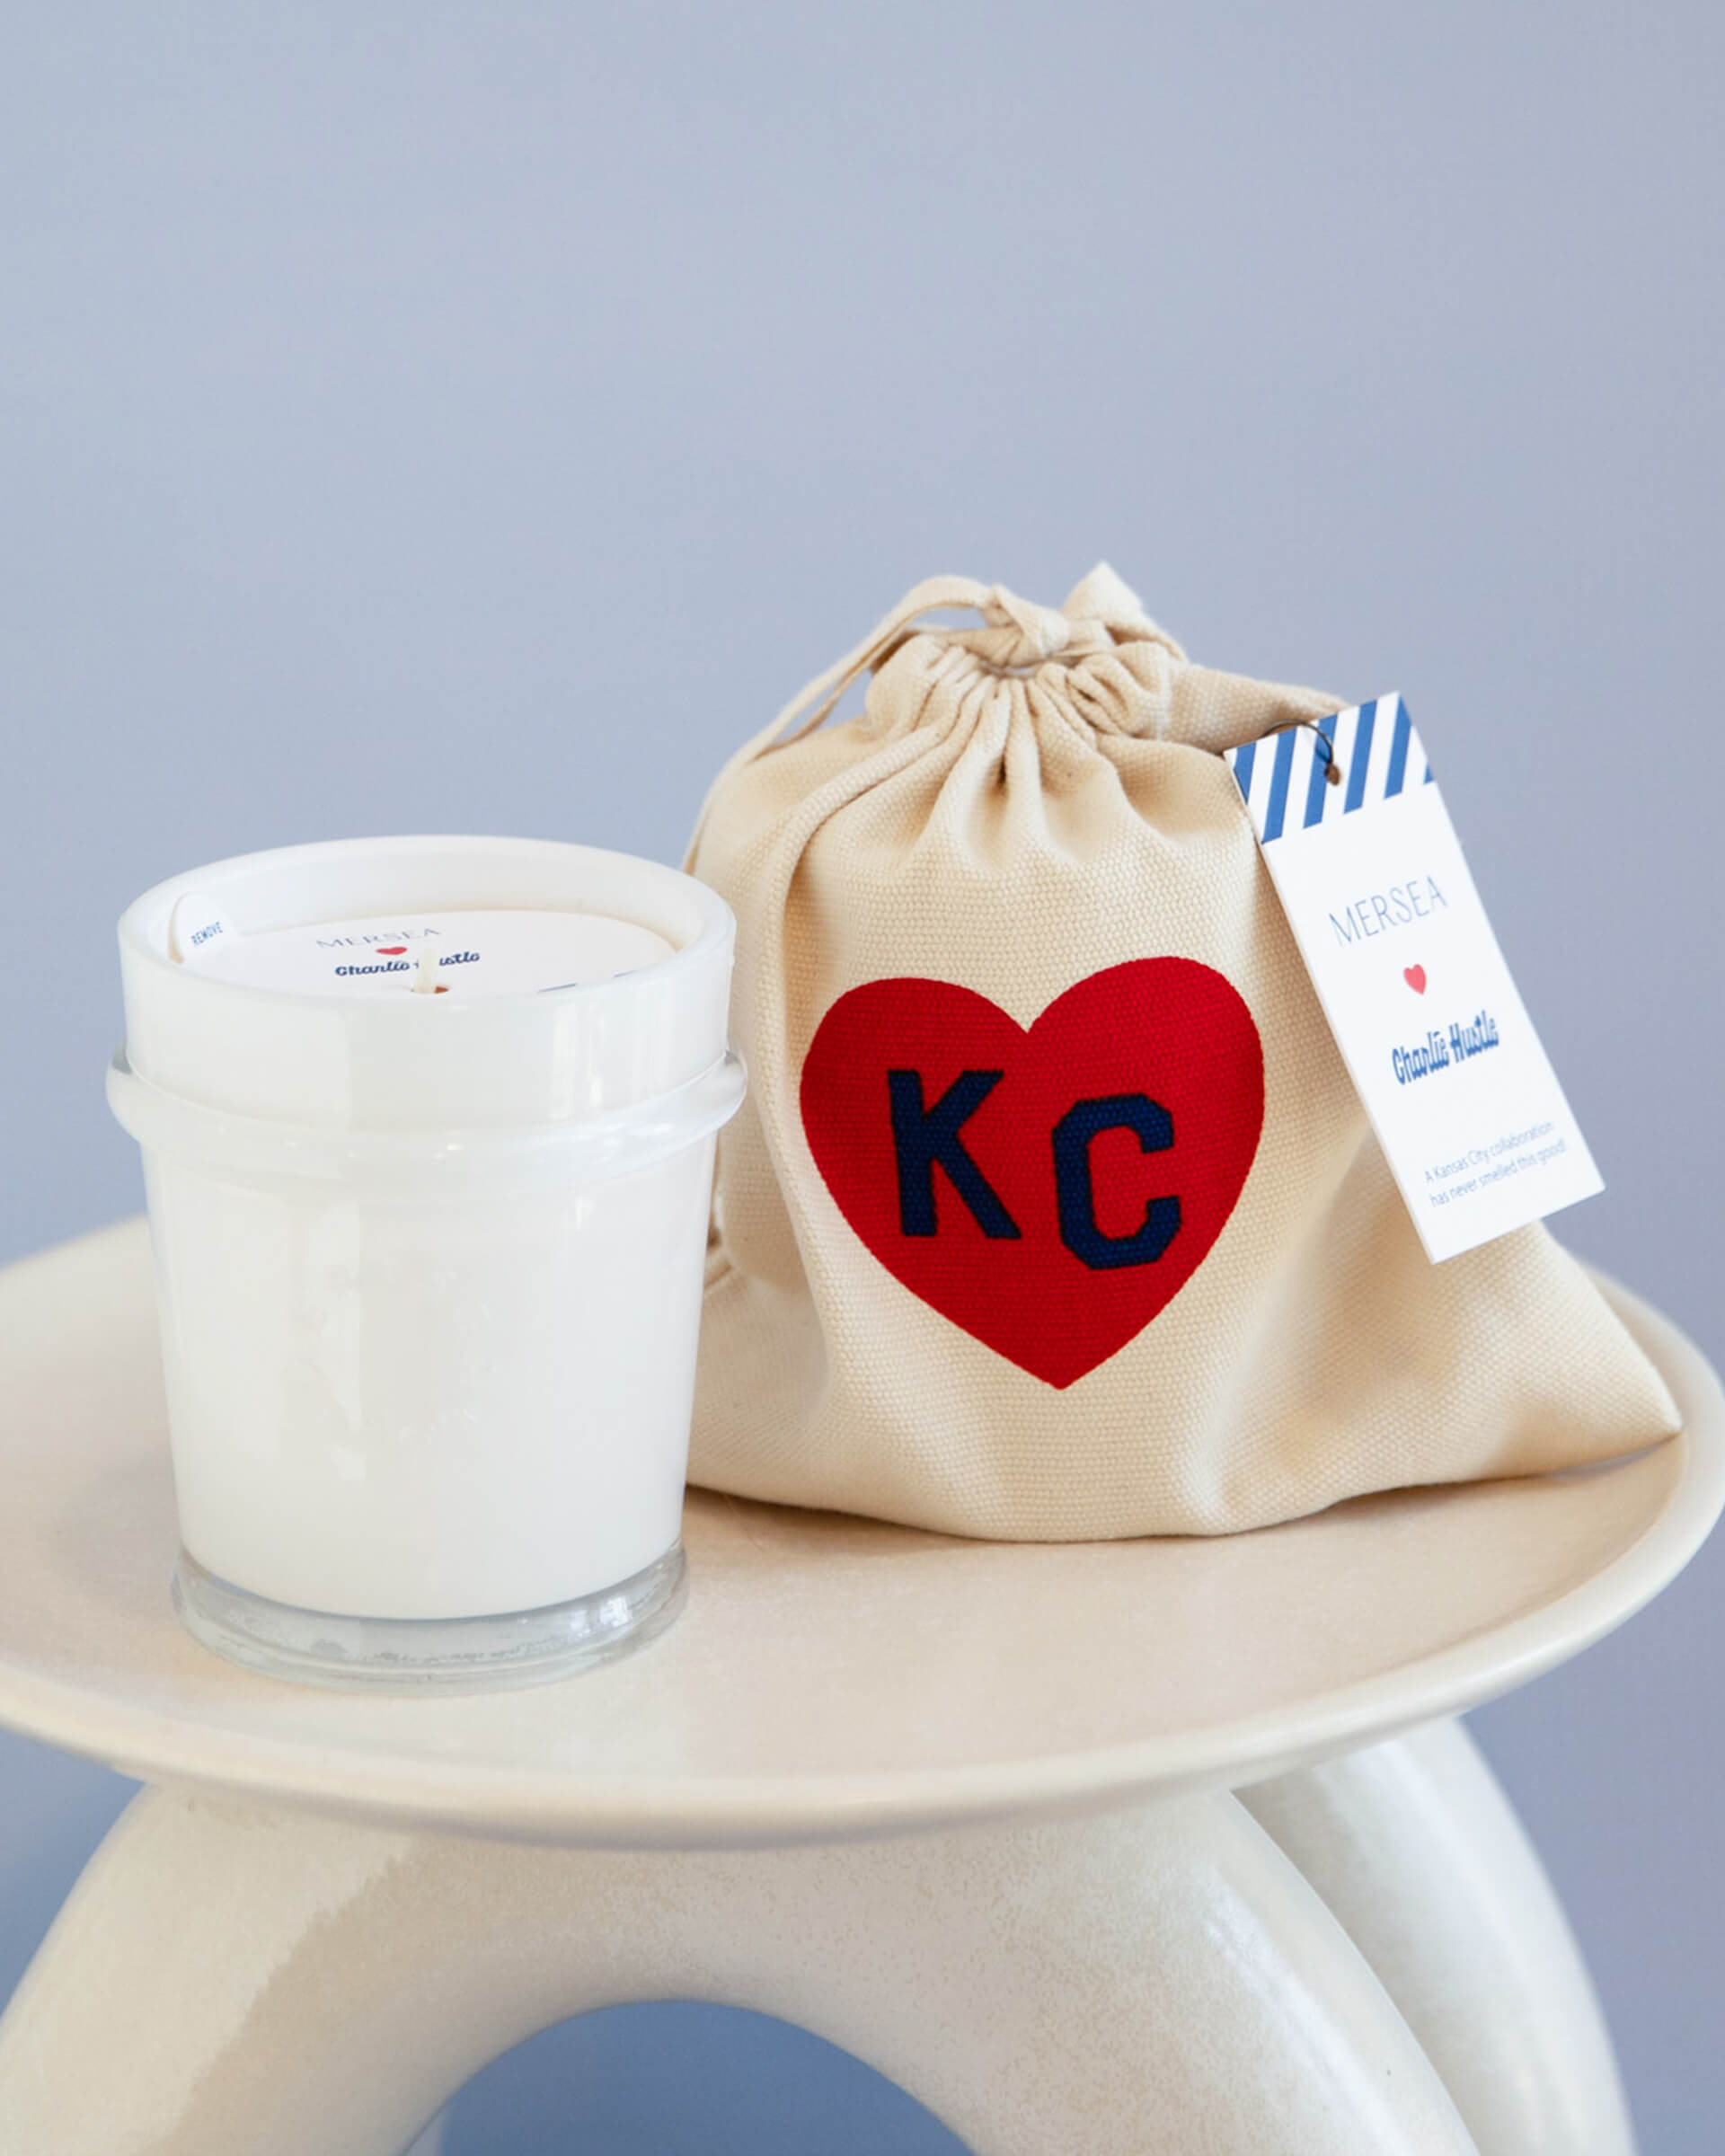 mersea colab coconut sugar candle sitting next to KC inside heart on candle bag on stool